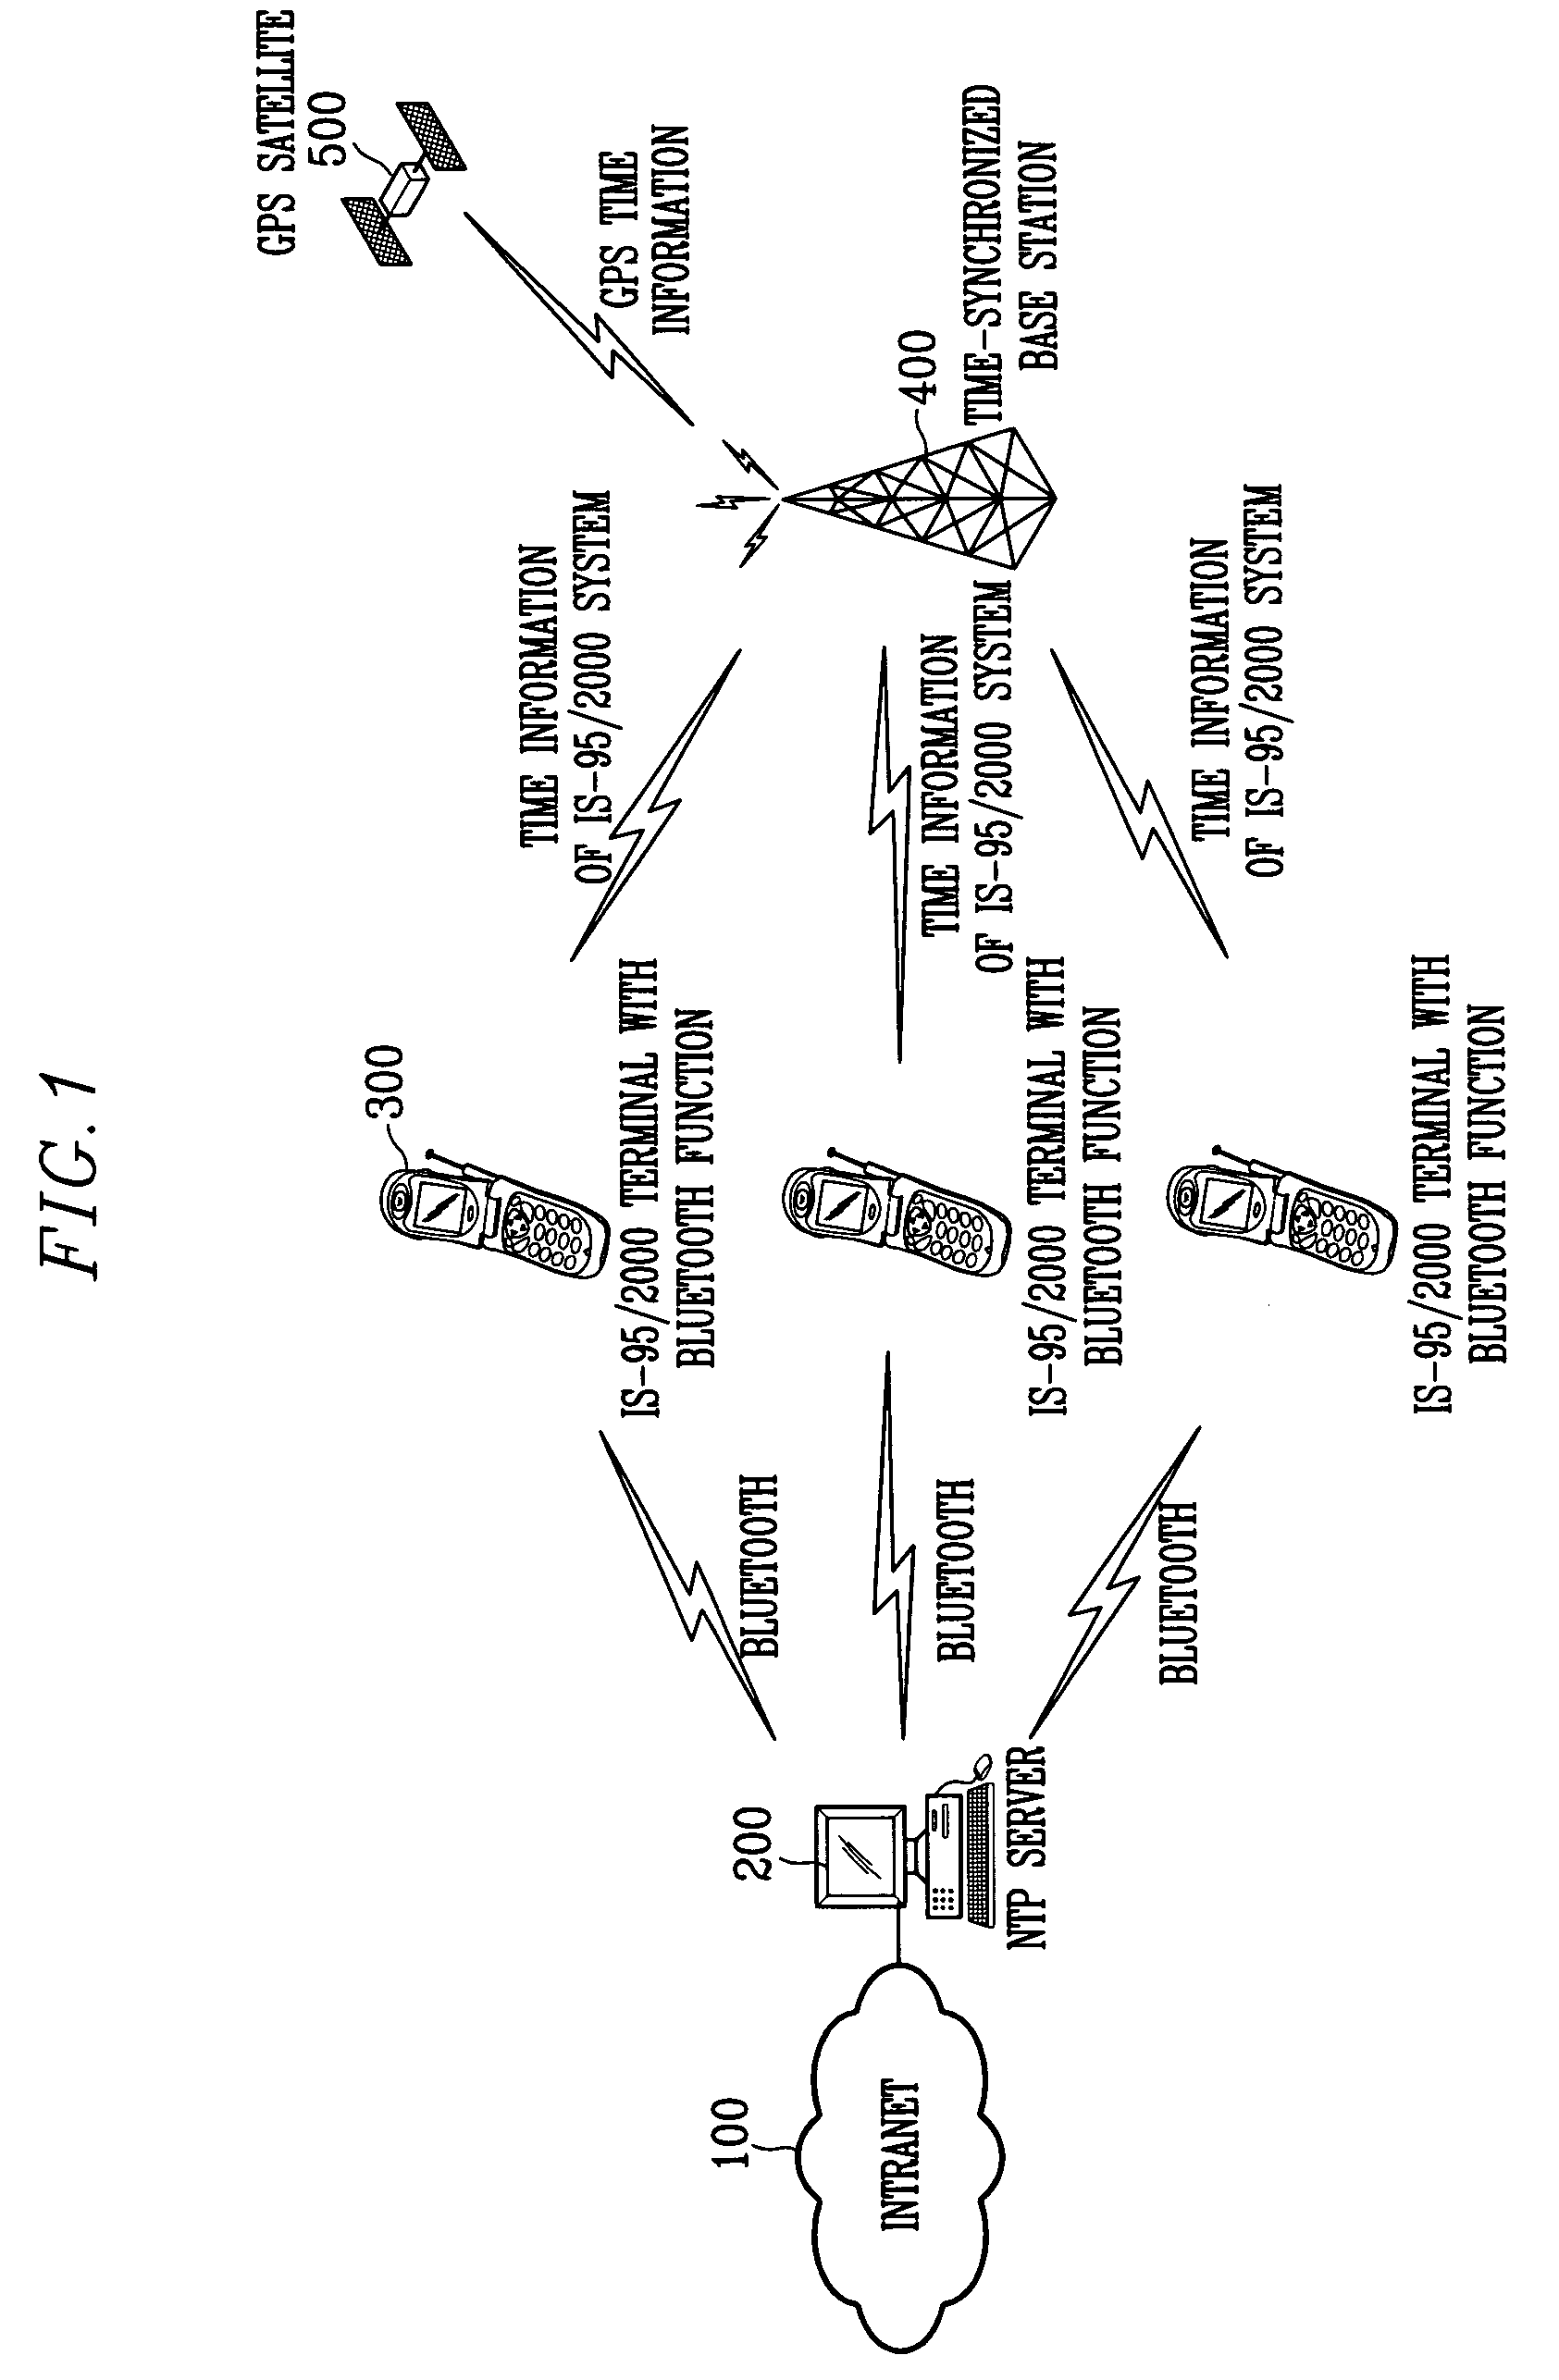 Network synchronization system and method using synchronous mobile terminal as external reference clock